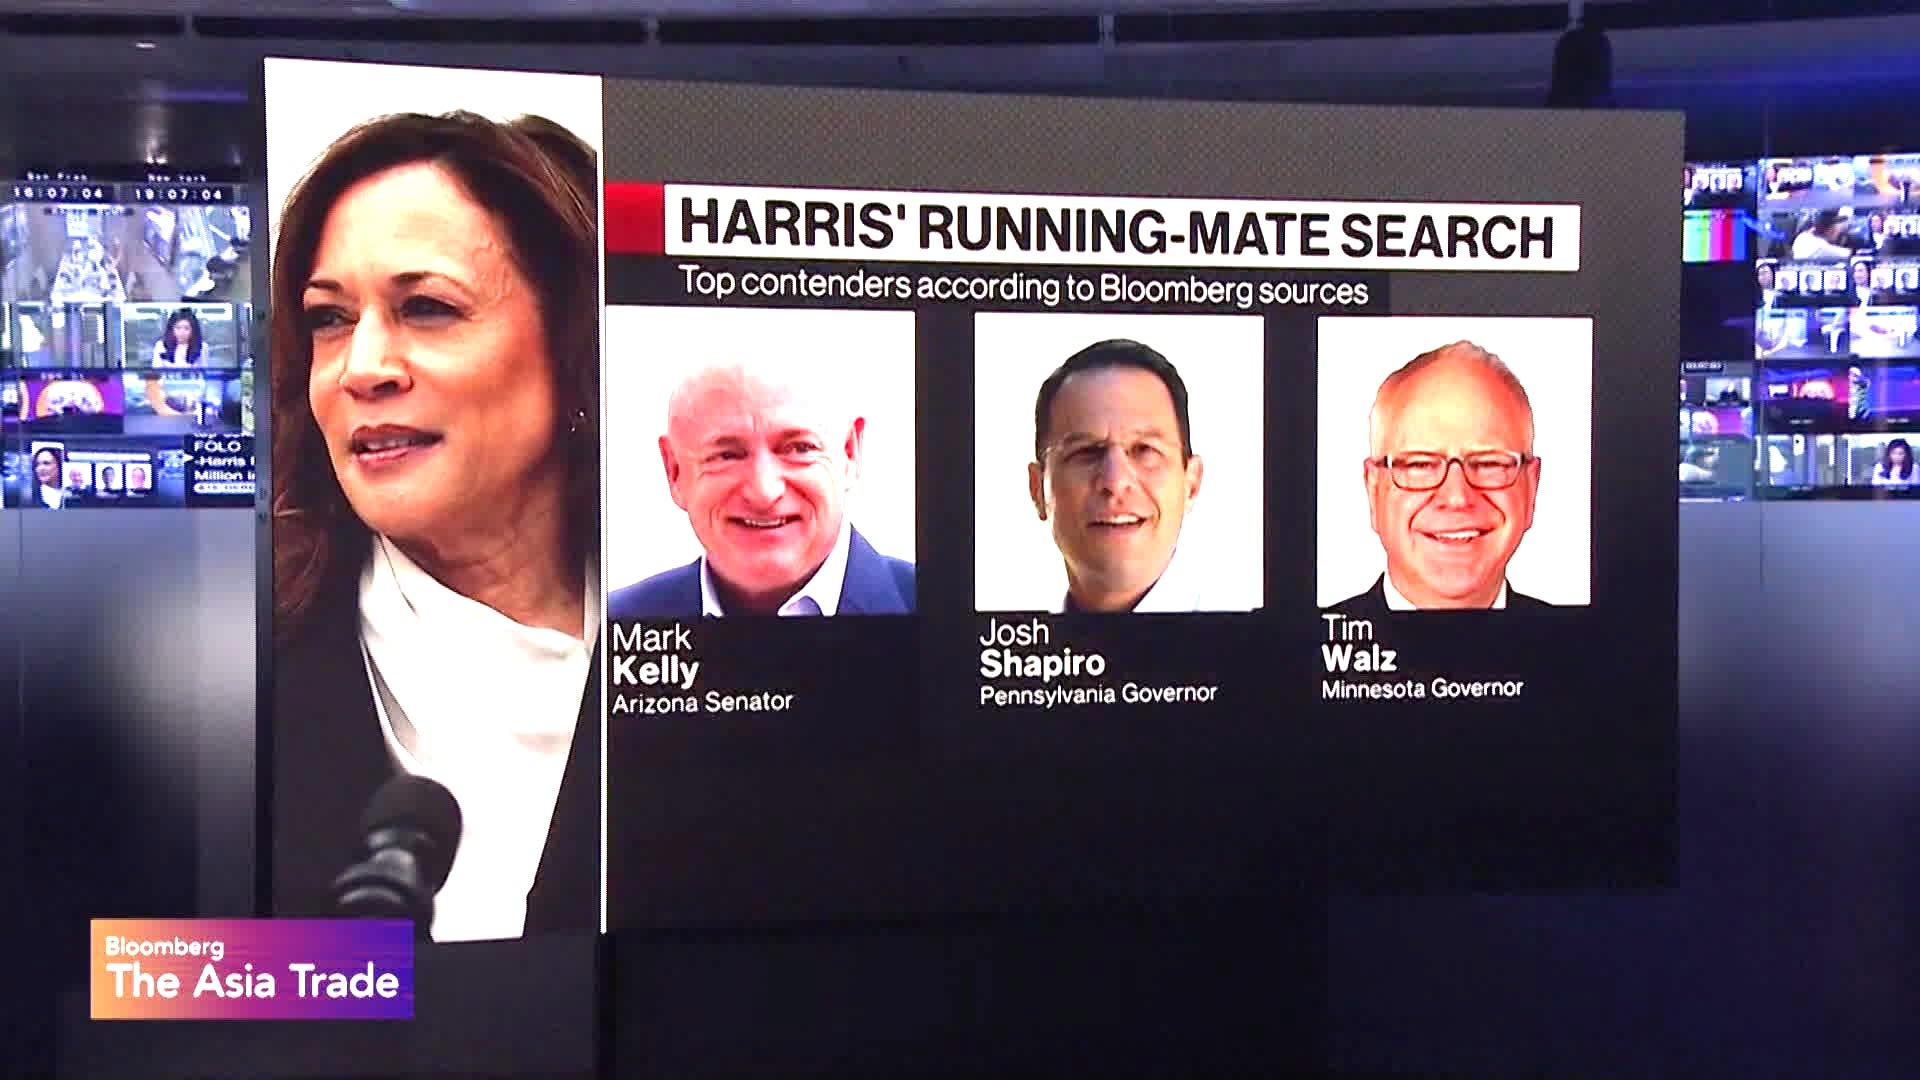 Kamala Harris Continues Search for Running Mate